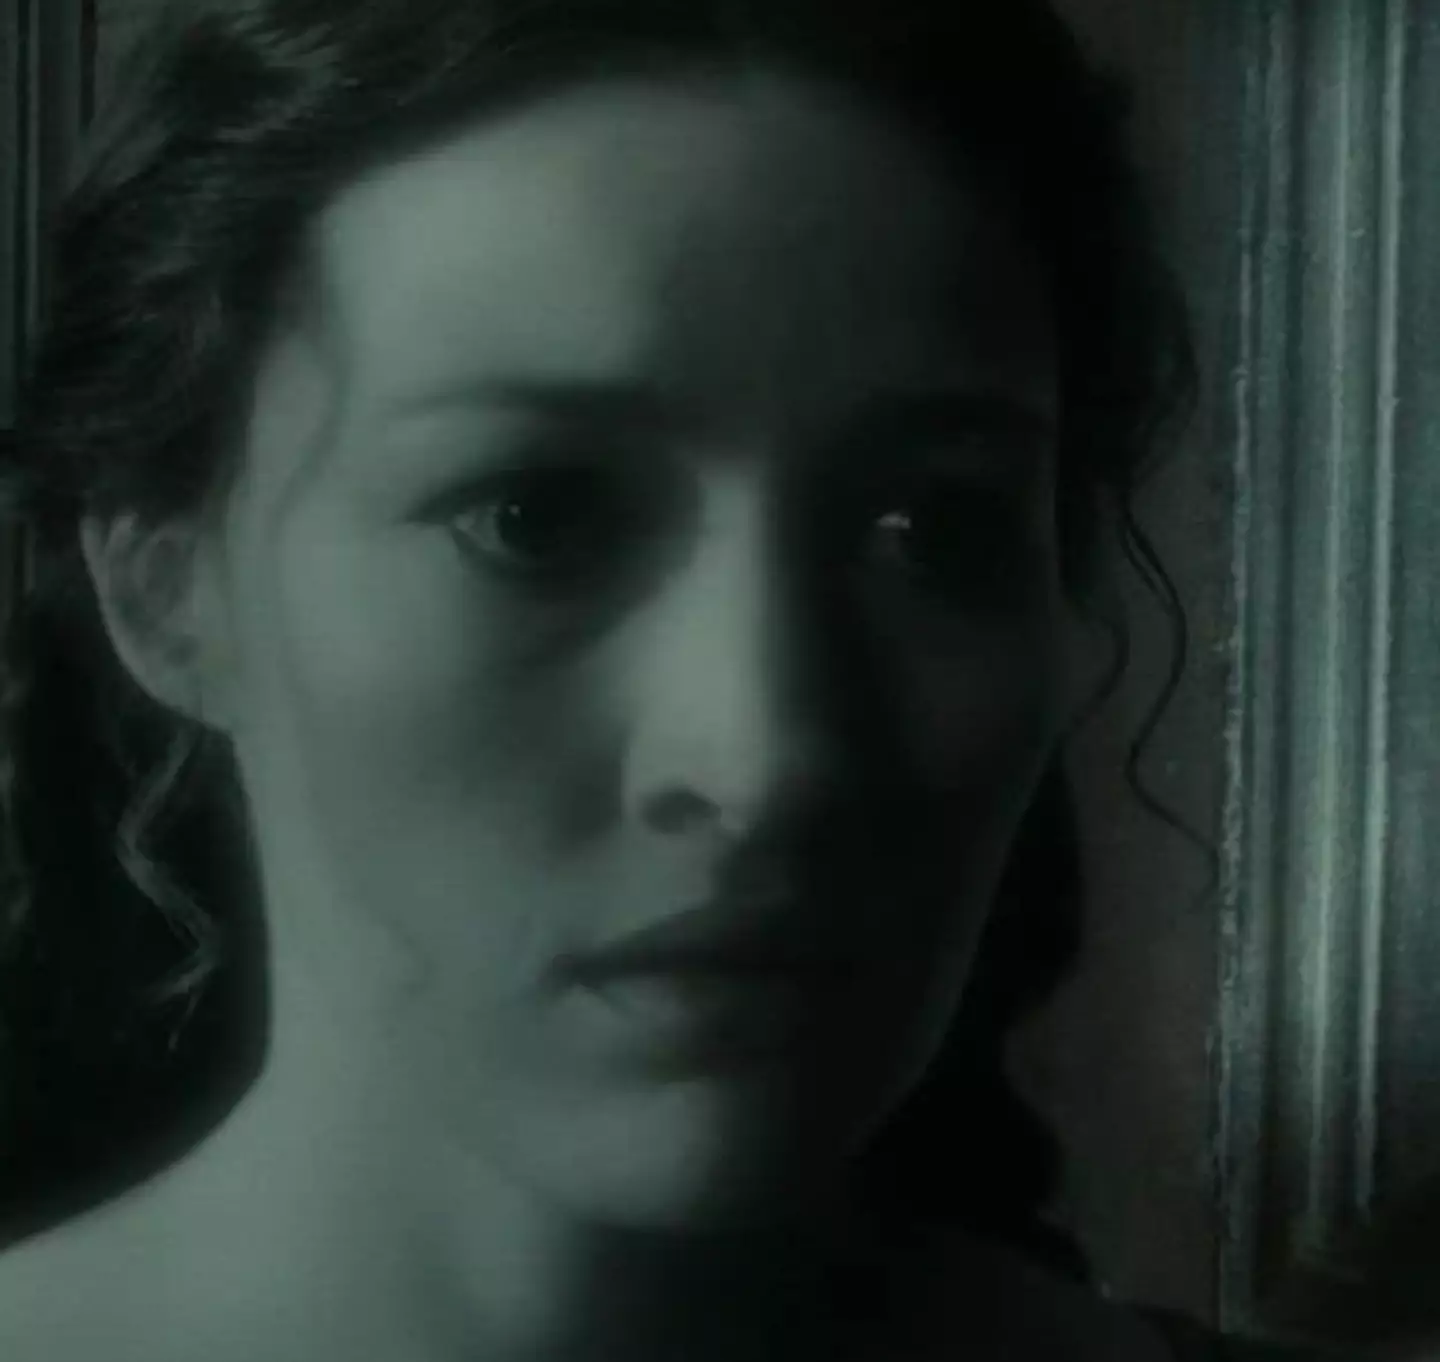 Kelly Macdonald played The Grey Lady in The Deathly Hallows Part 2.